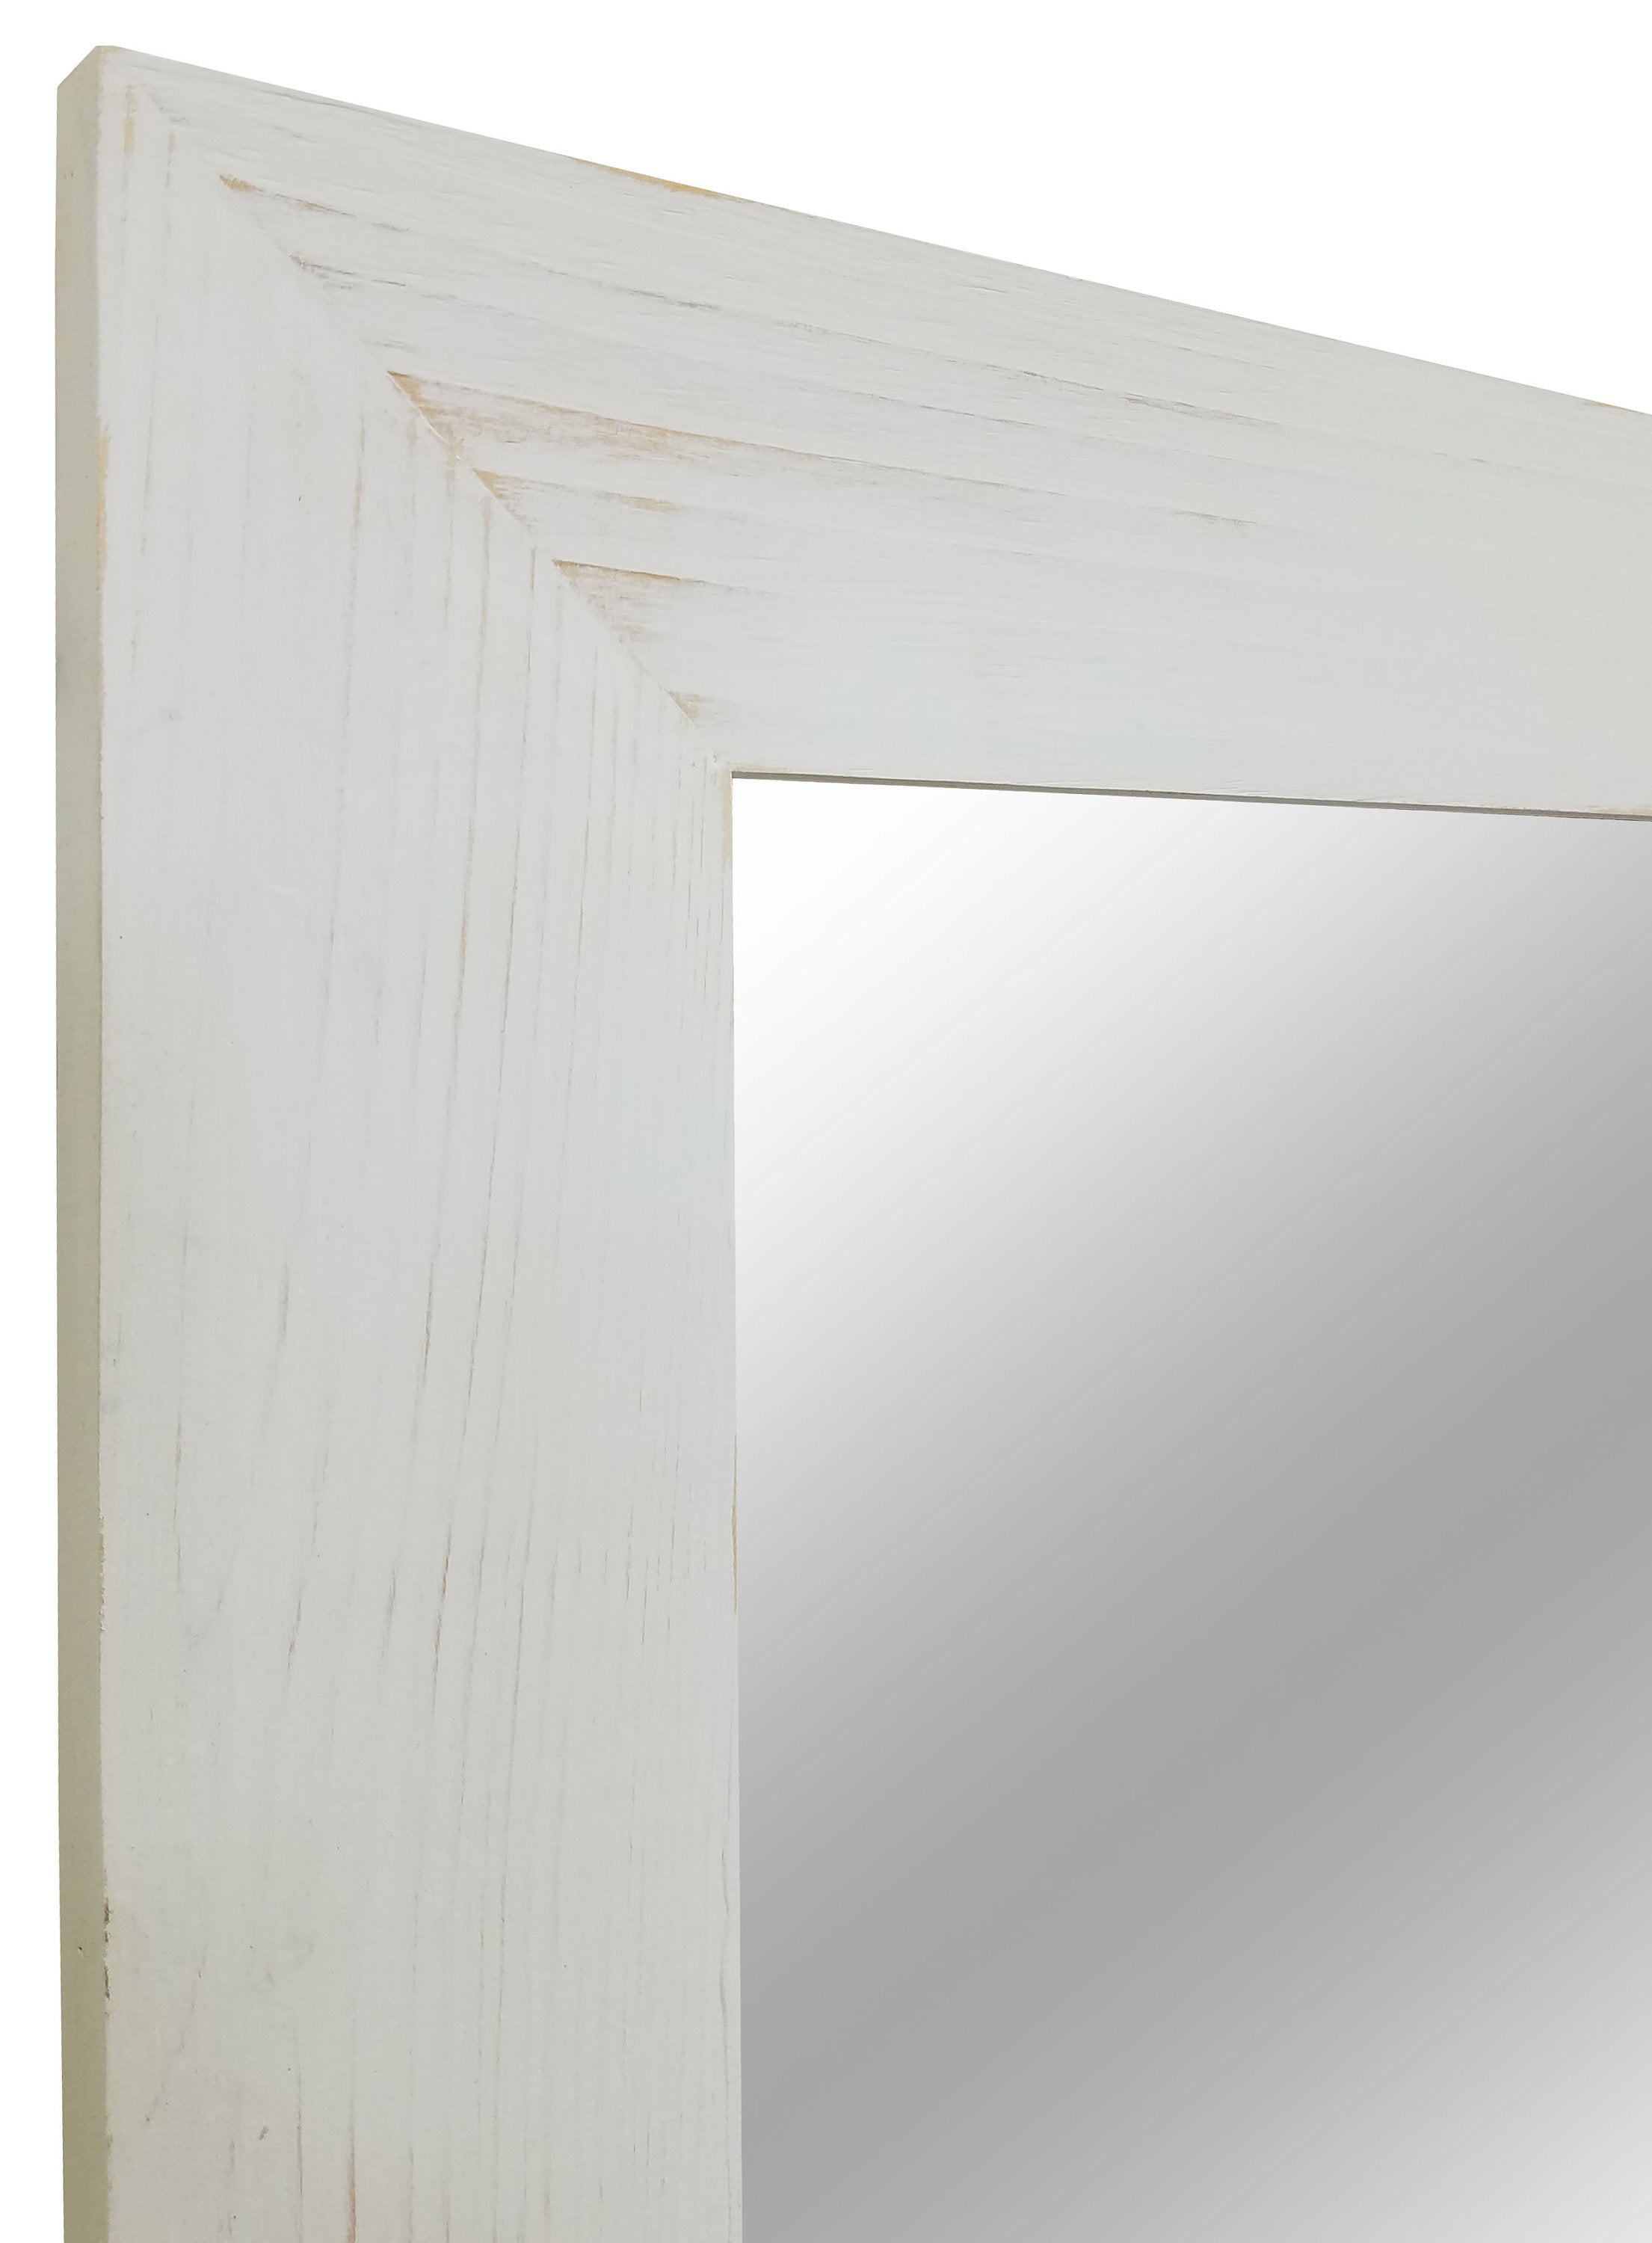 Shiplap Rustic Framed Wall Mirror, 20 Paint Colors, Shown in Antique White, Handmade in the USA